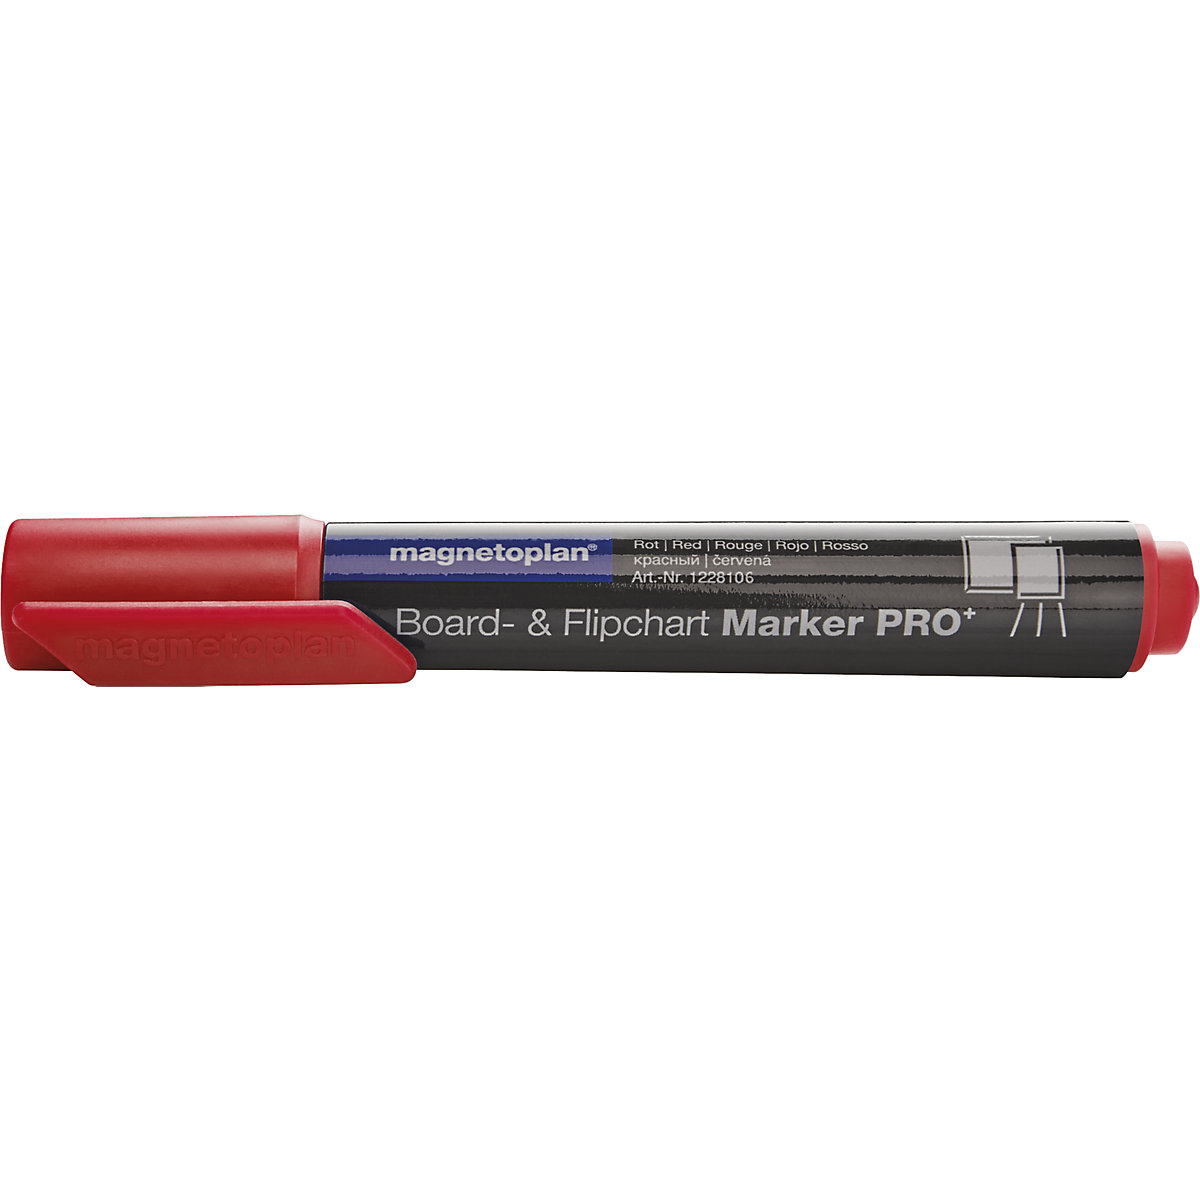 PRO+ board and flip-chart marker – magnetoplan, line width 1.5 – 3 mm, pack of 24, red-3